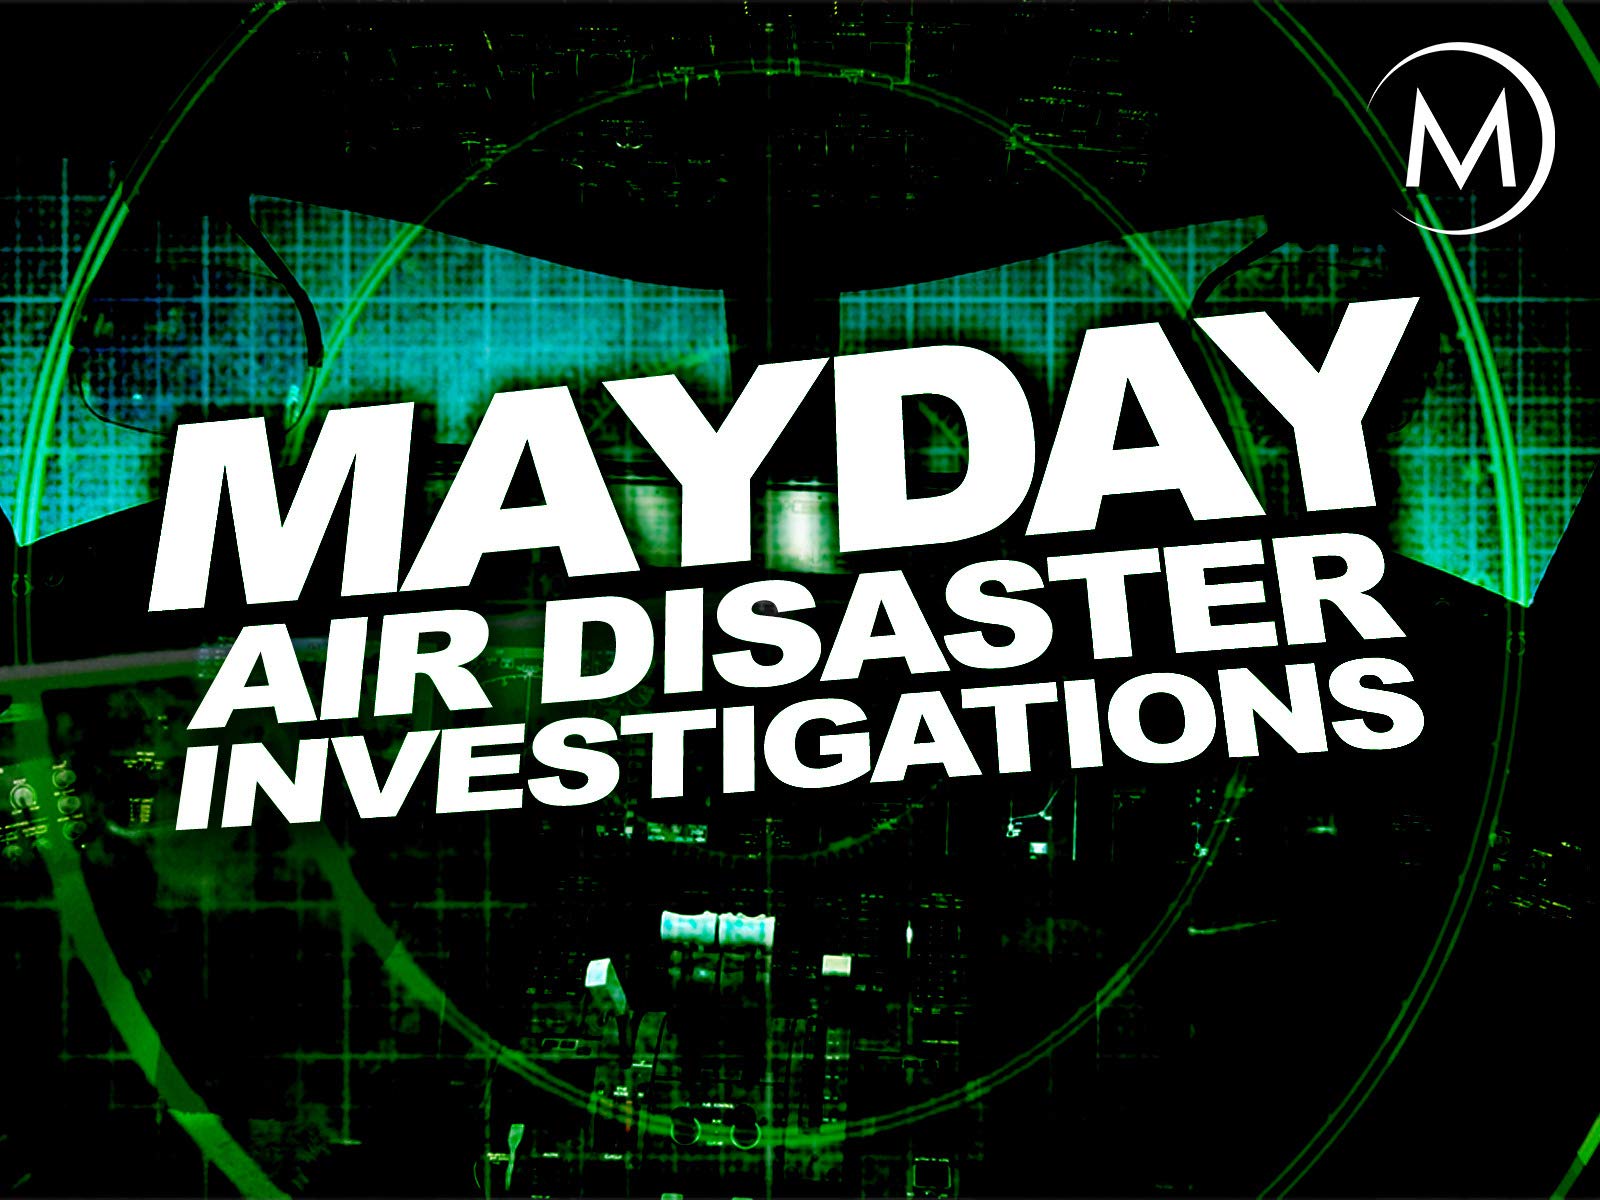 Binge-watching "Mayday" (the series about plane crashes) and looking up each incident on Google/Wiki afterward. -u/buckyhermit